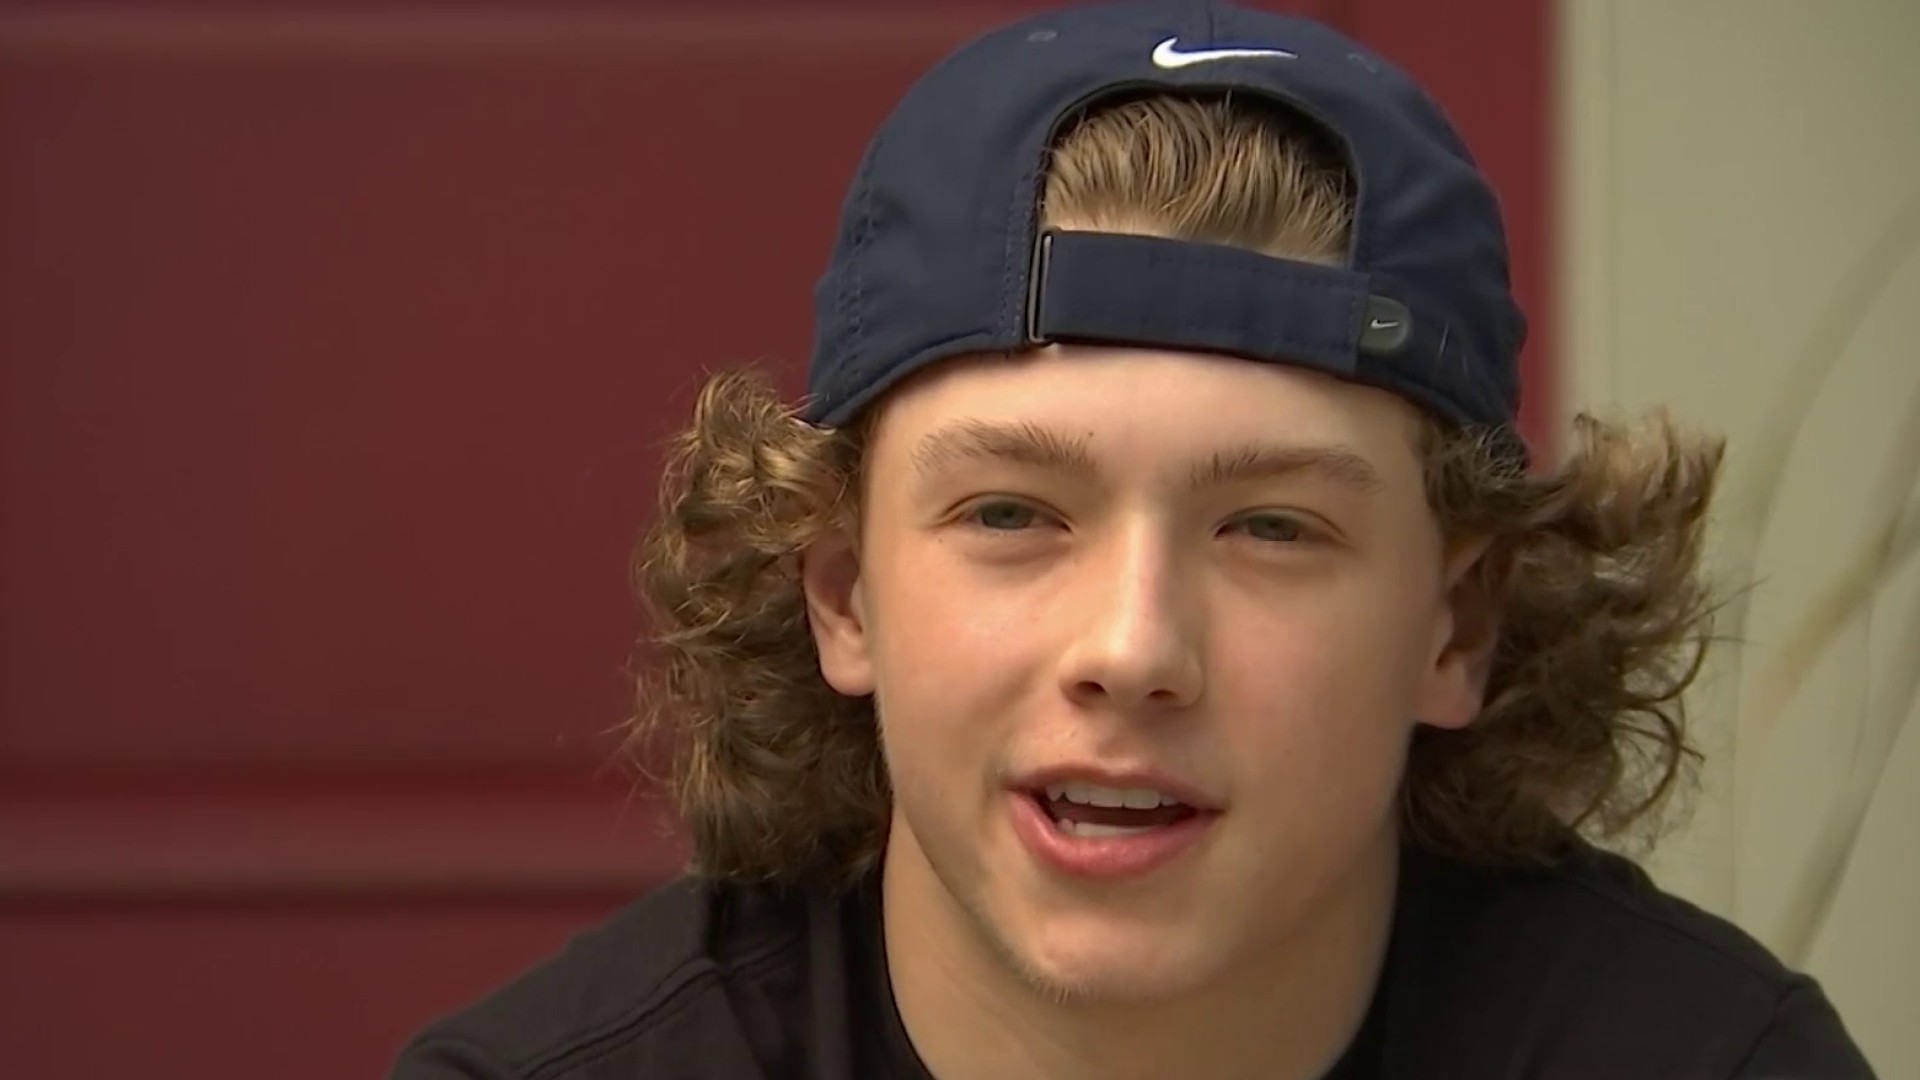 Youth Hockey Player Scores Championship-Winning Goal 1 Year After Mother's Death